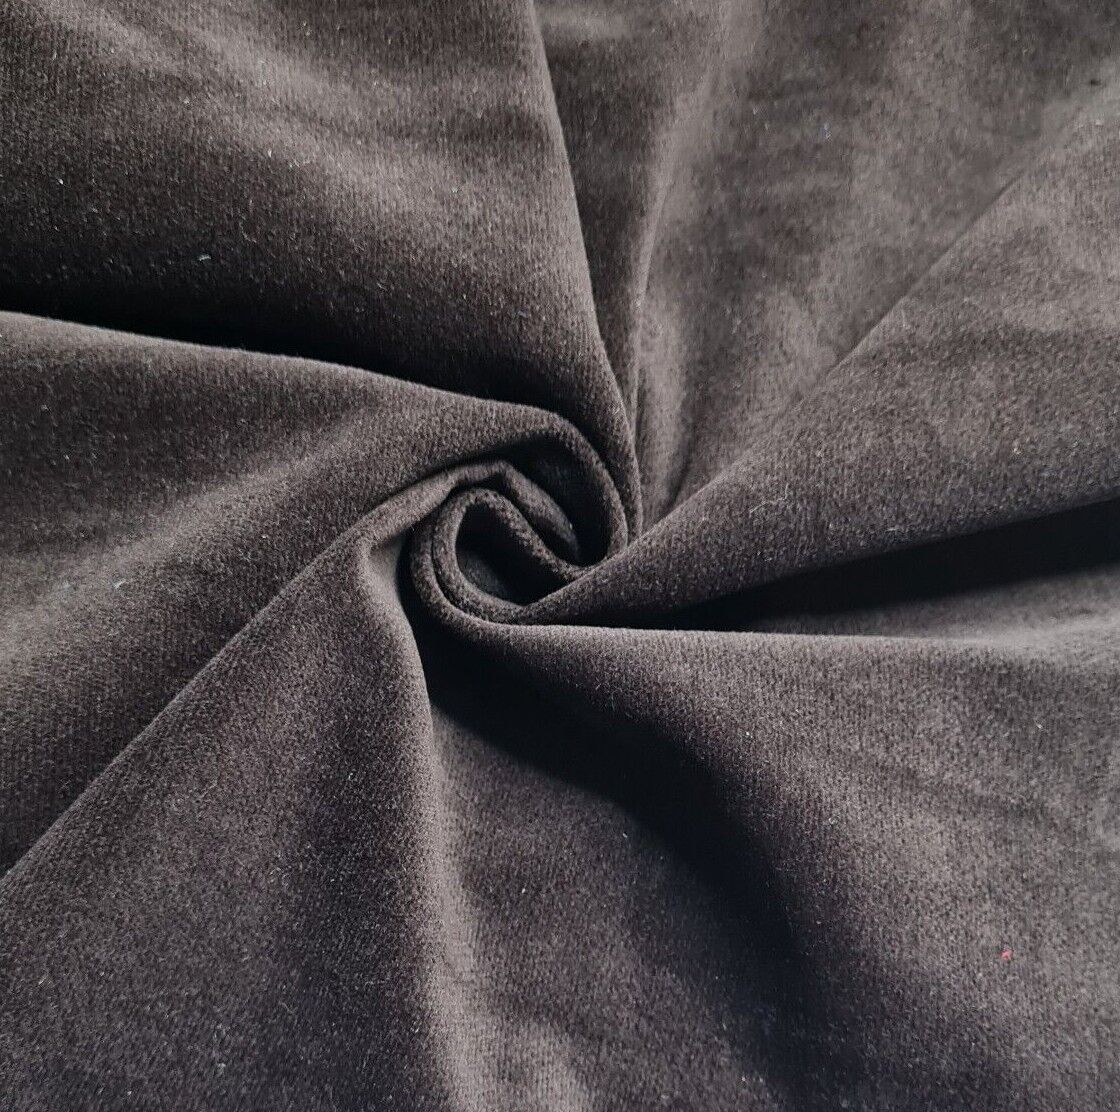 Cotton Velvet Fabric Brown Colour 55" Wide Sold by Metre